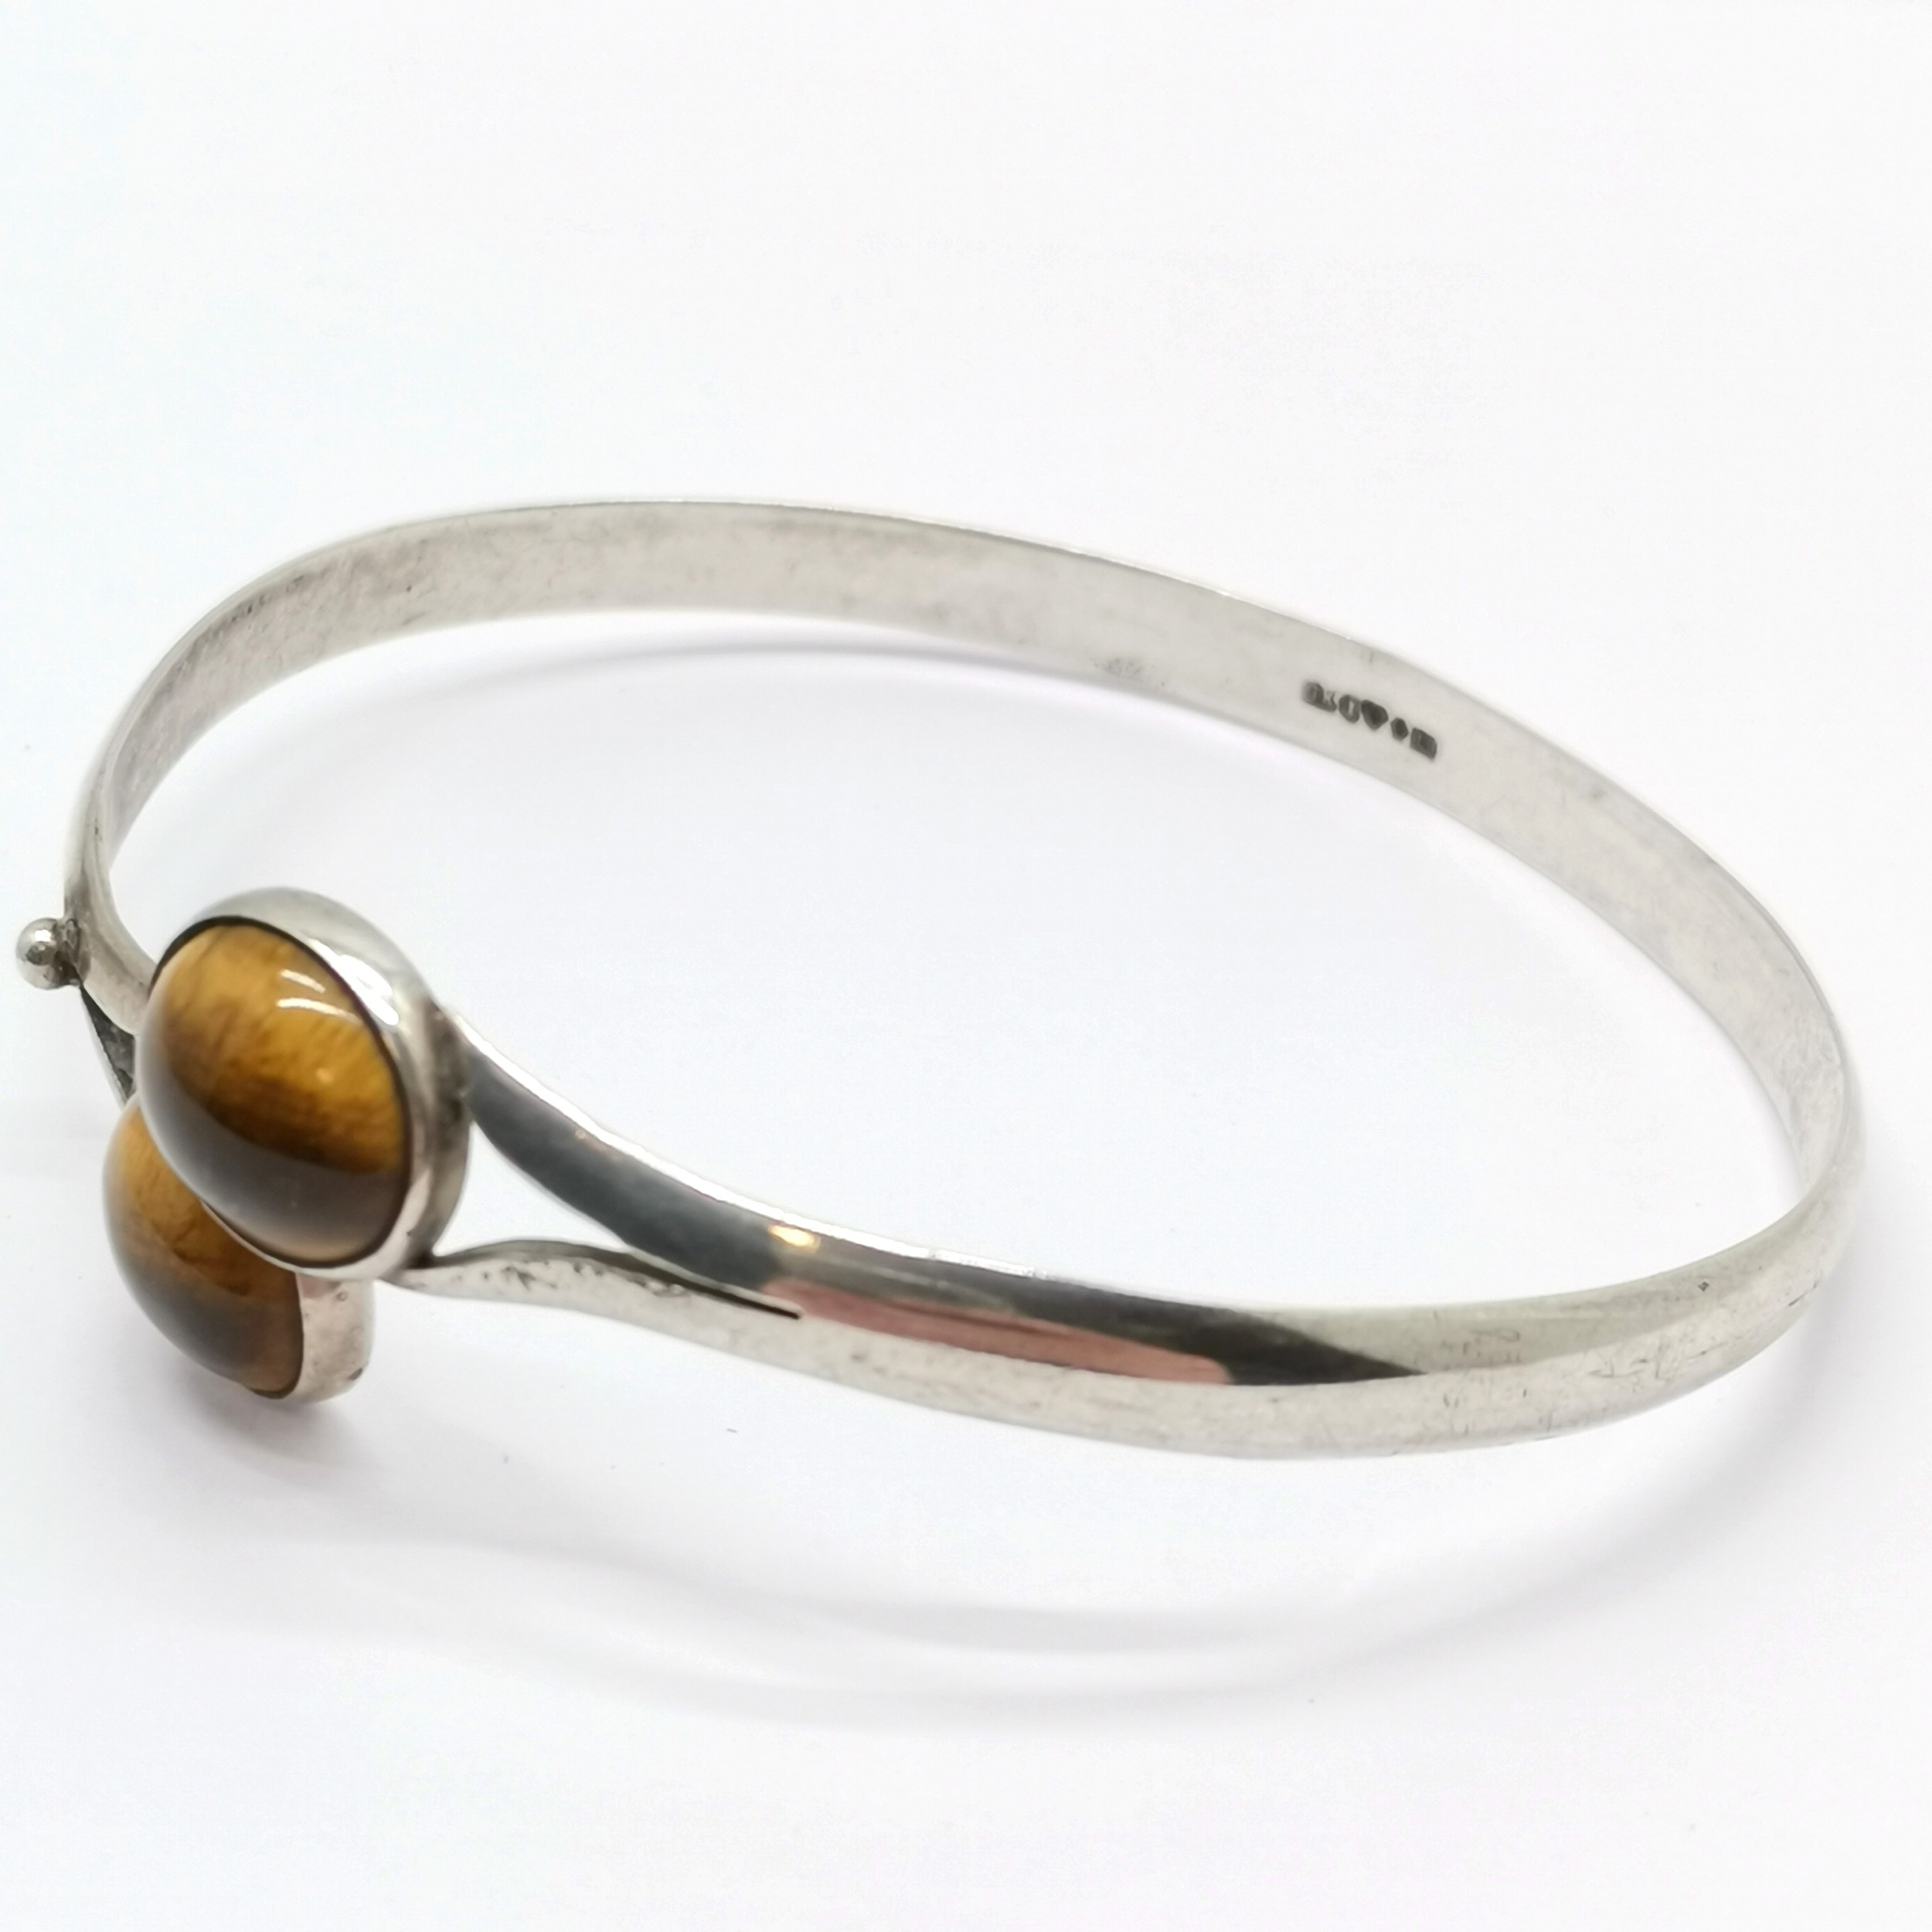 1961 Swedish silver bangle set with tigers eye by Ge-Kå (GK) - 18.5g total weight - Image 4 of 5